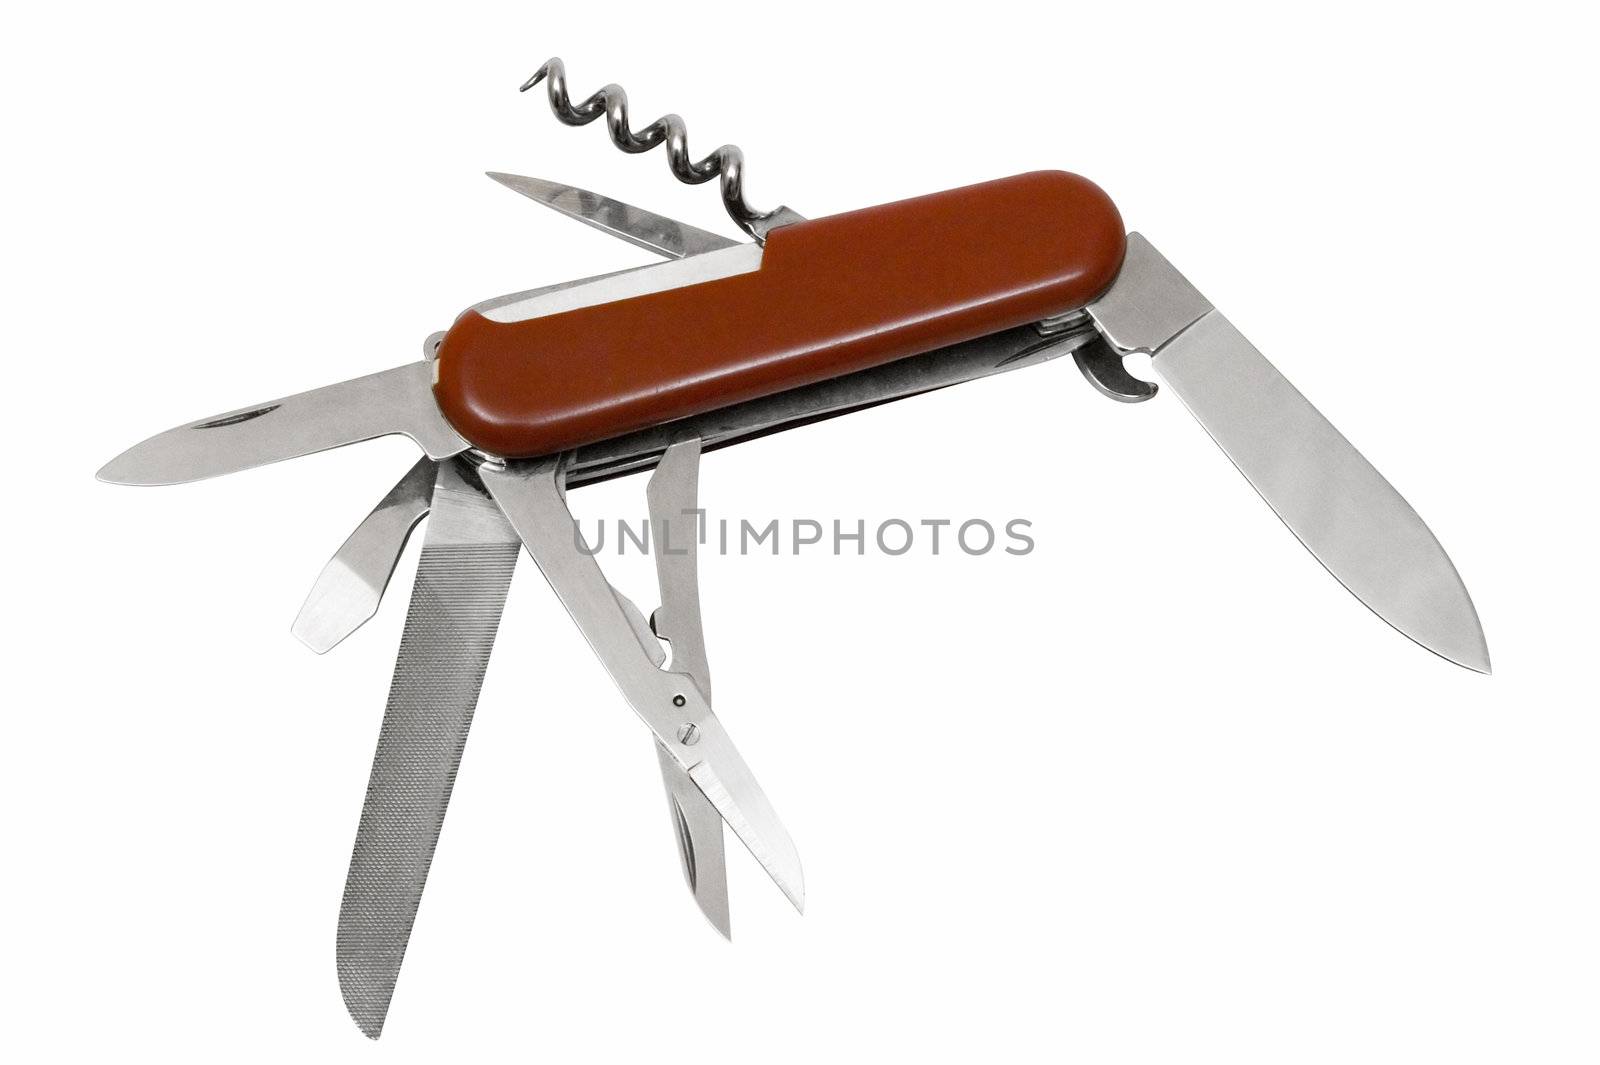 Red army knife isolated on a white background. File contains clipping path.